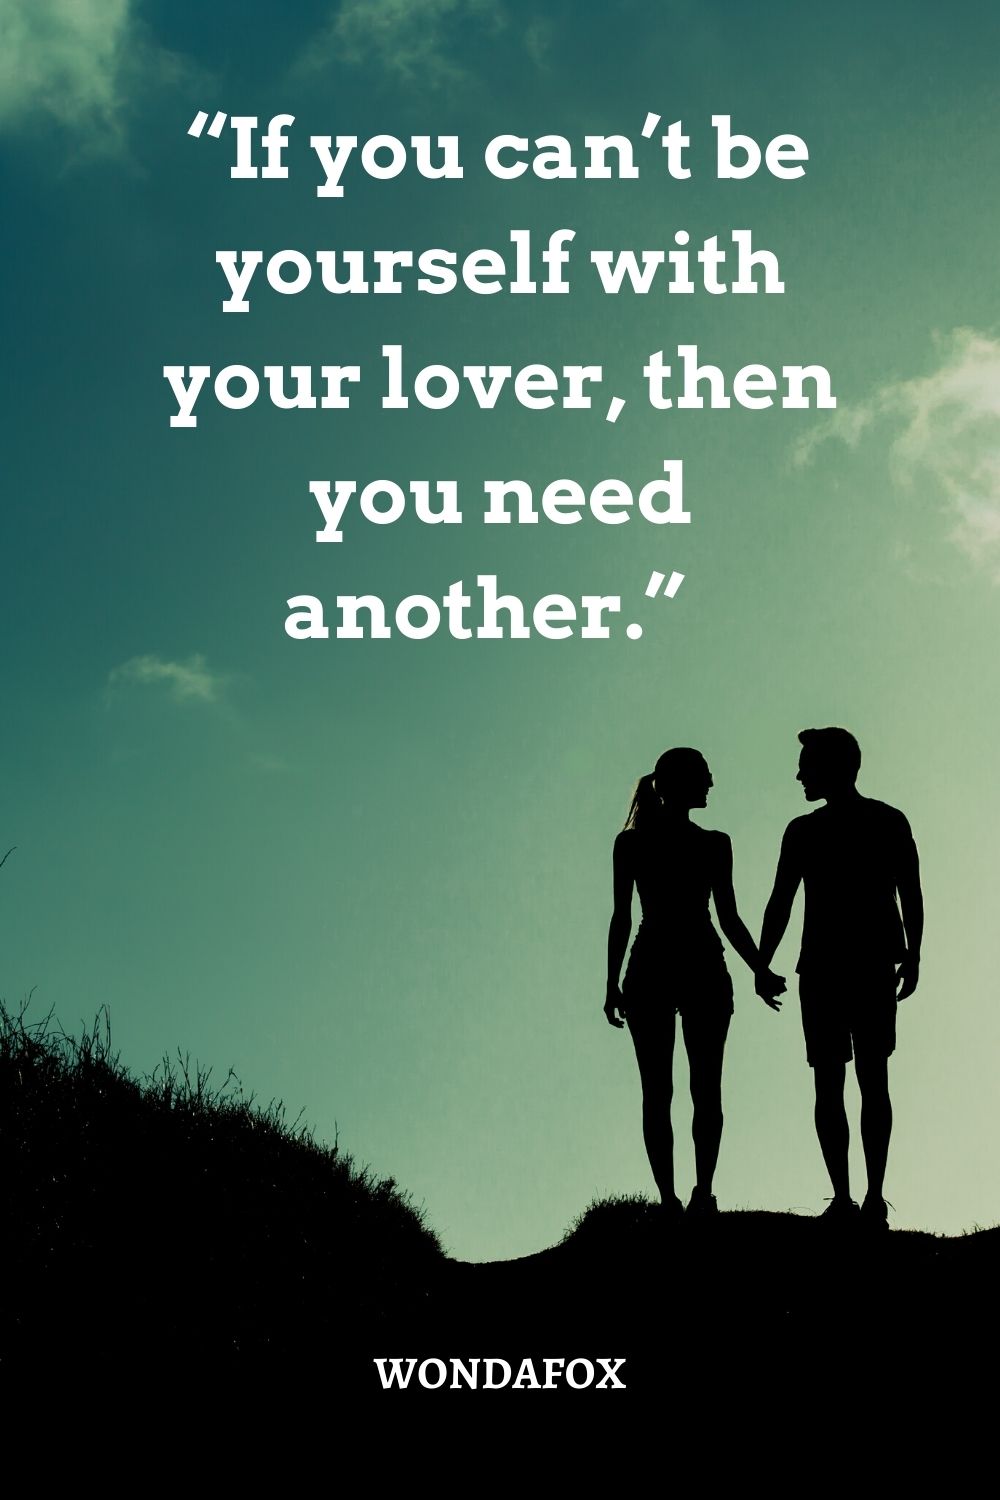 “If you can’t be yourself with your lover, then you need another.”  